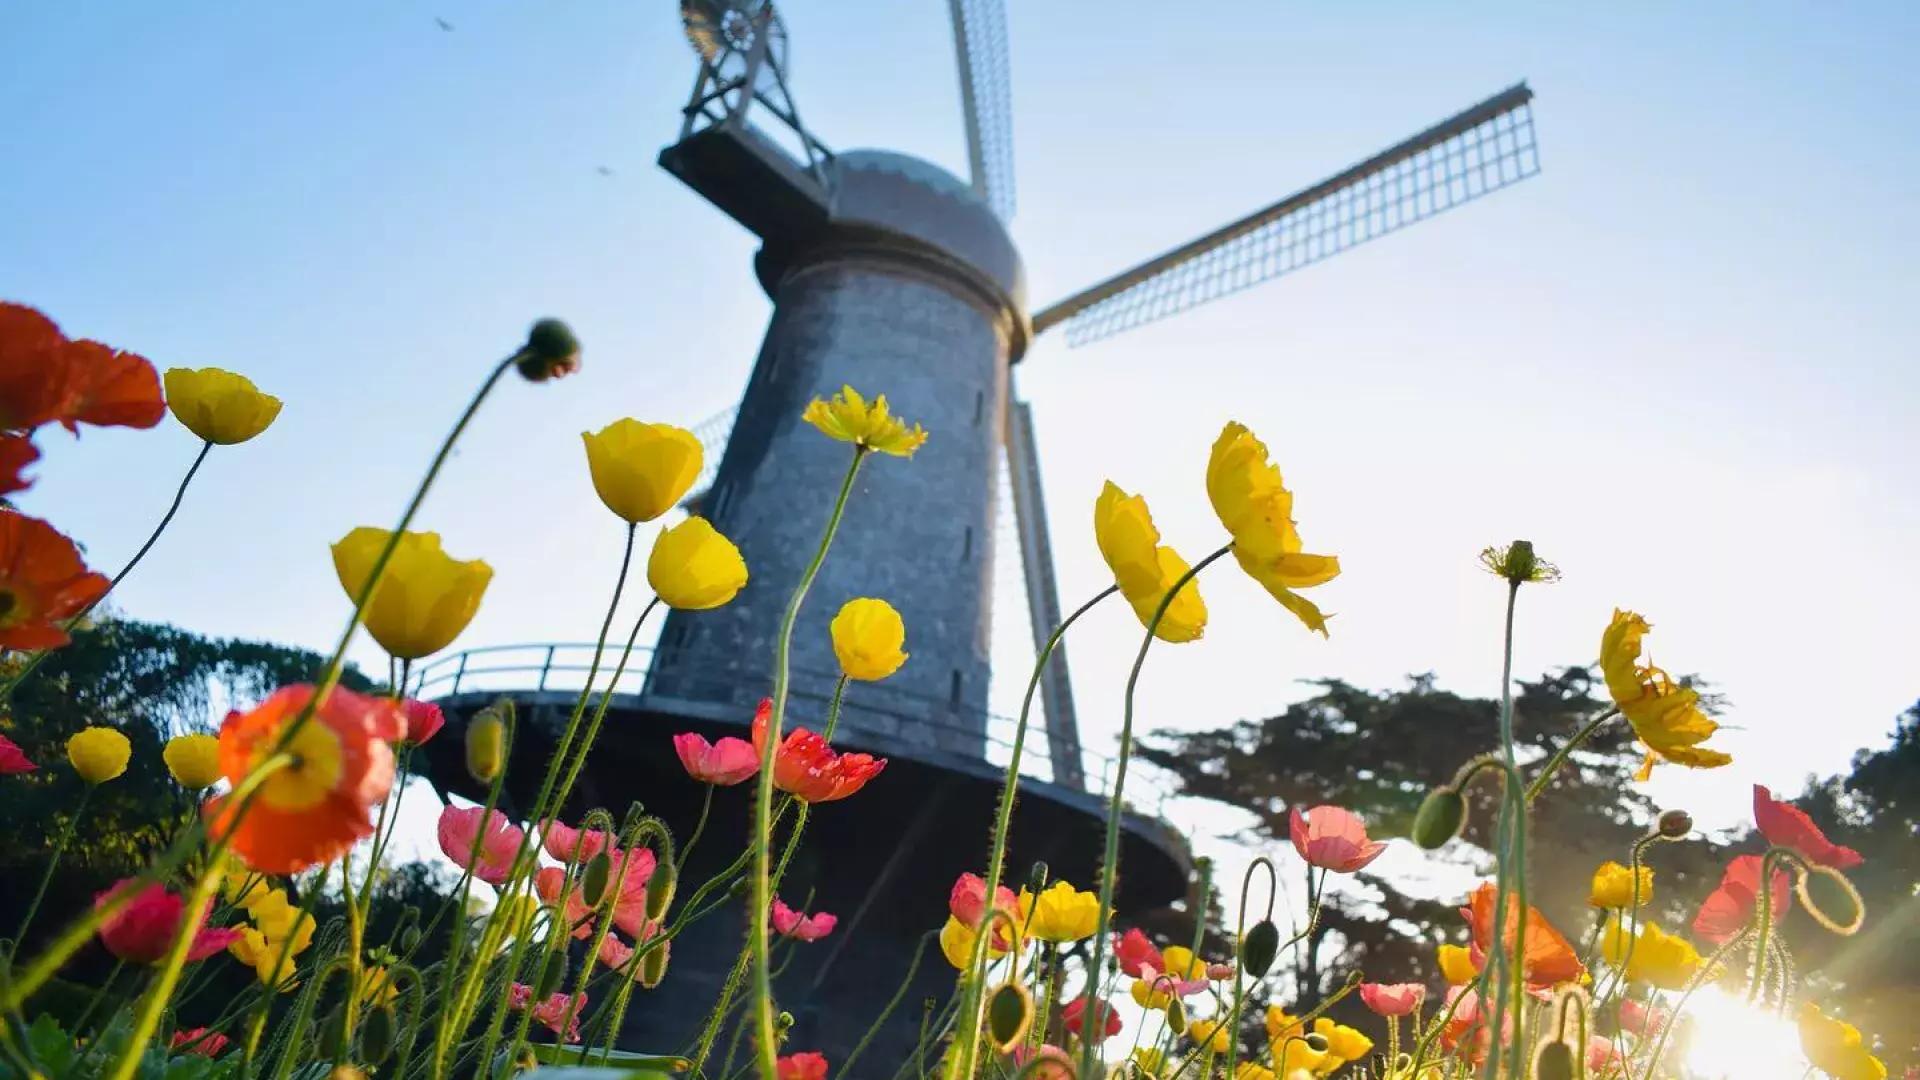 Tulips bloom beneath one of Golden Gate Park's famous windmills.